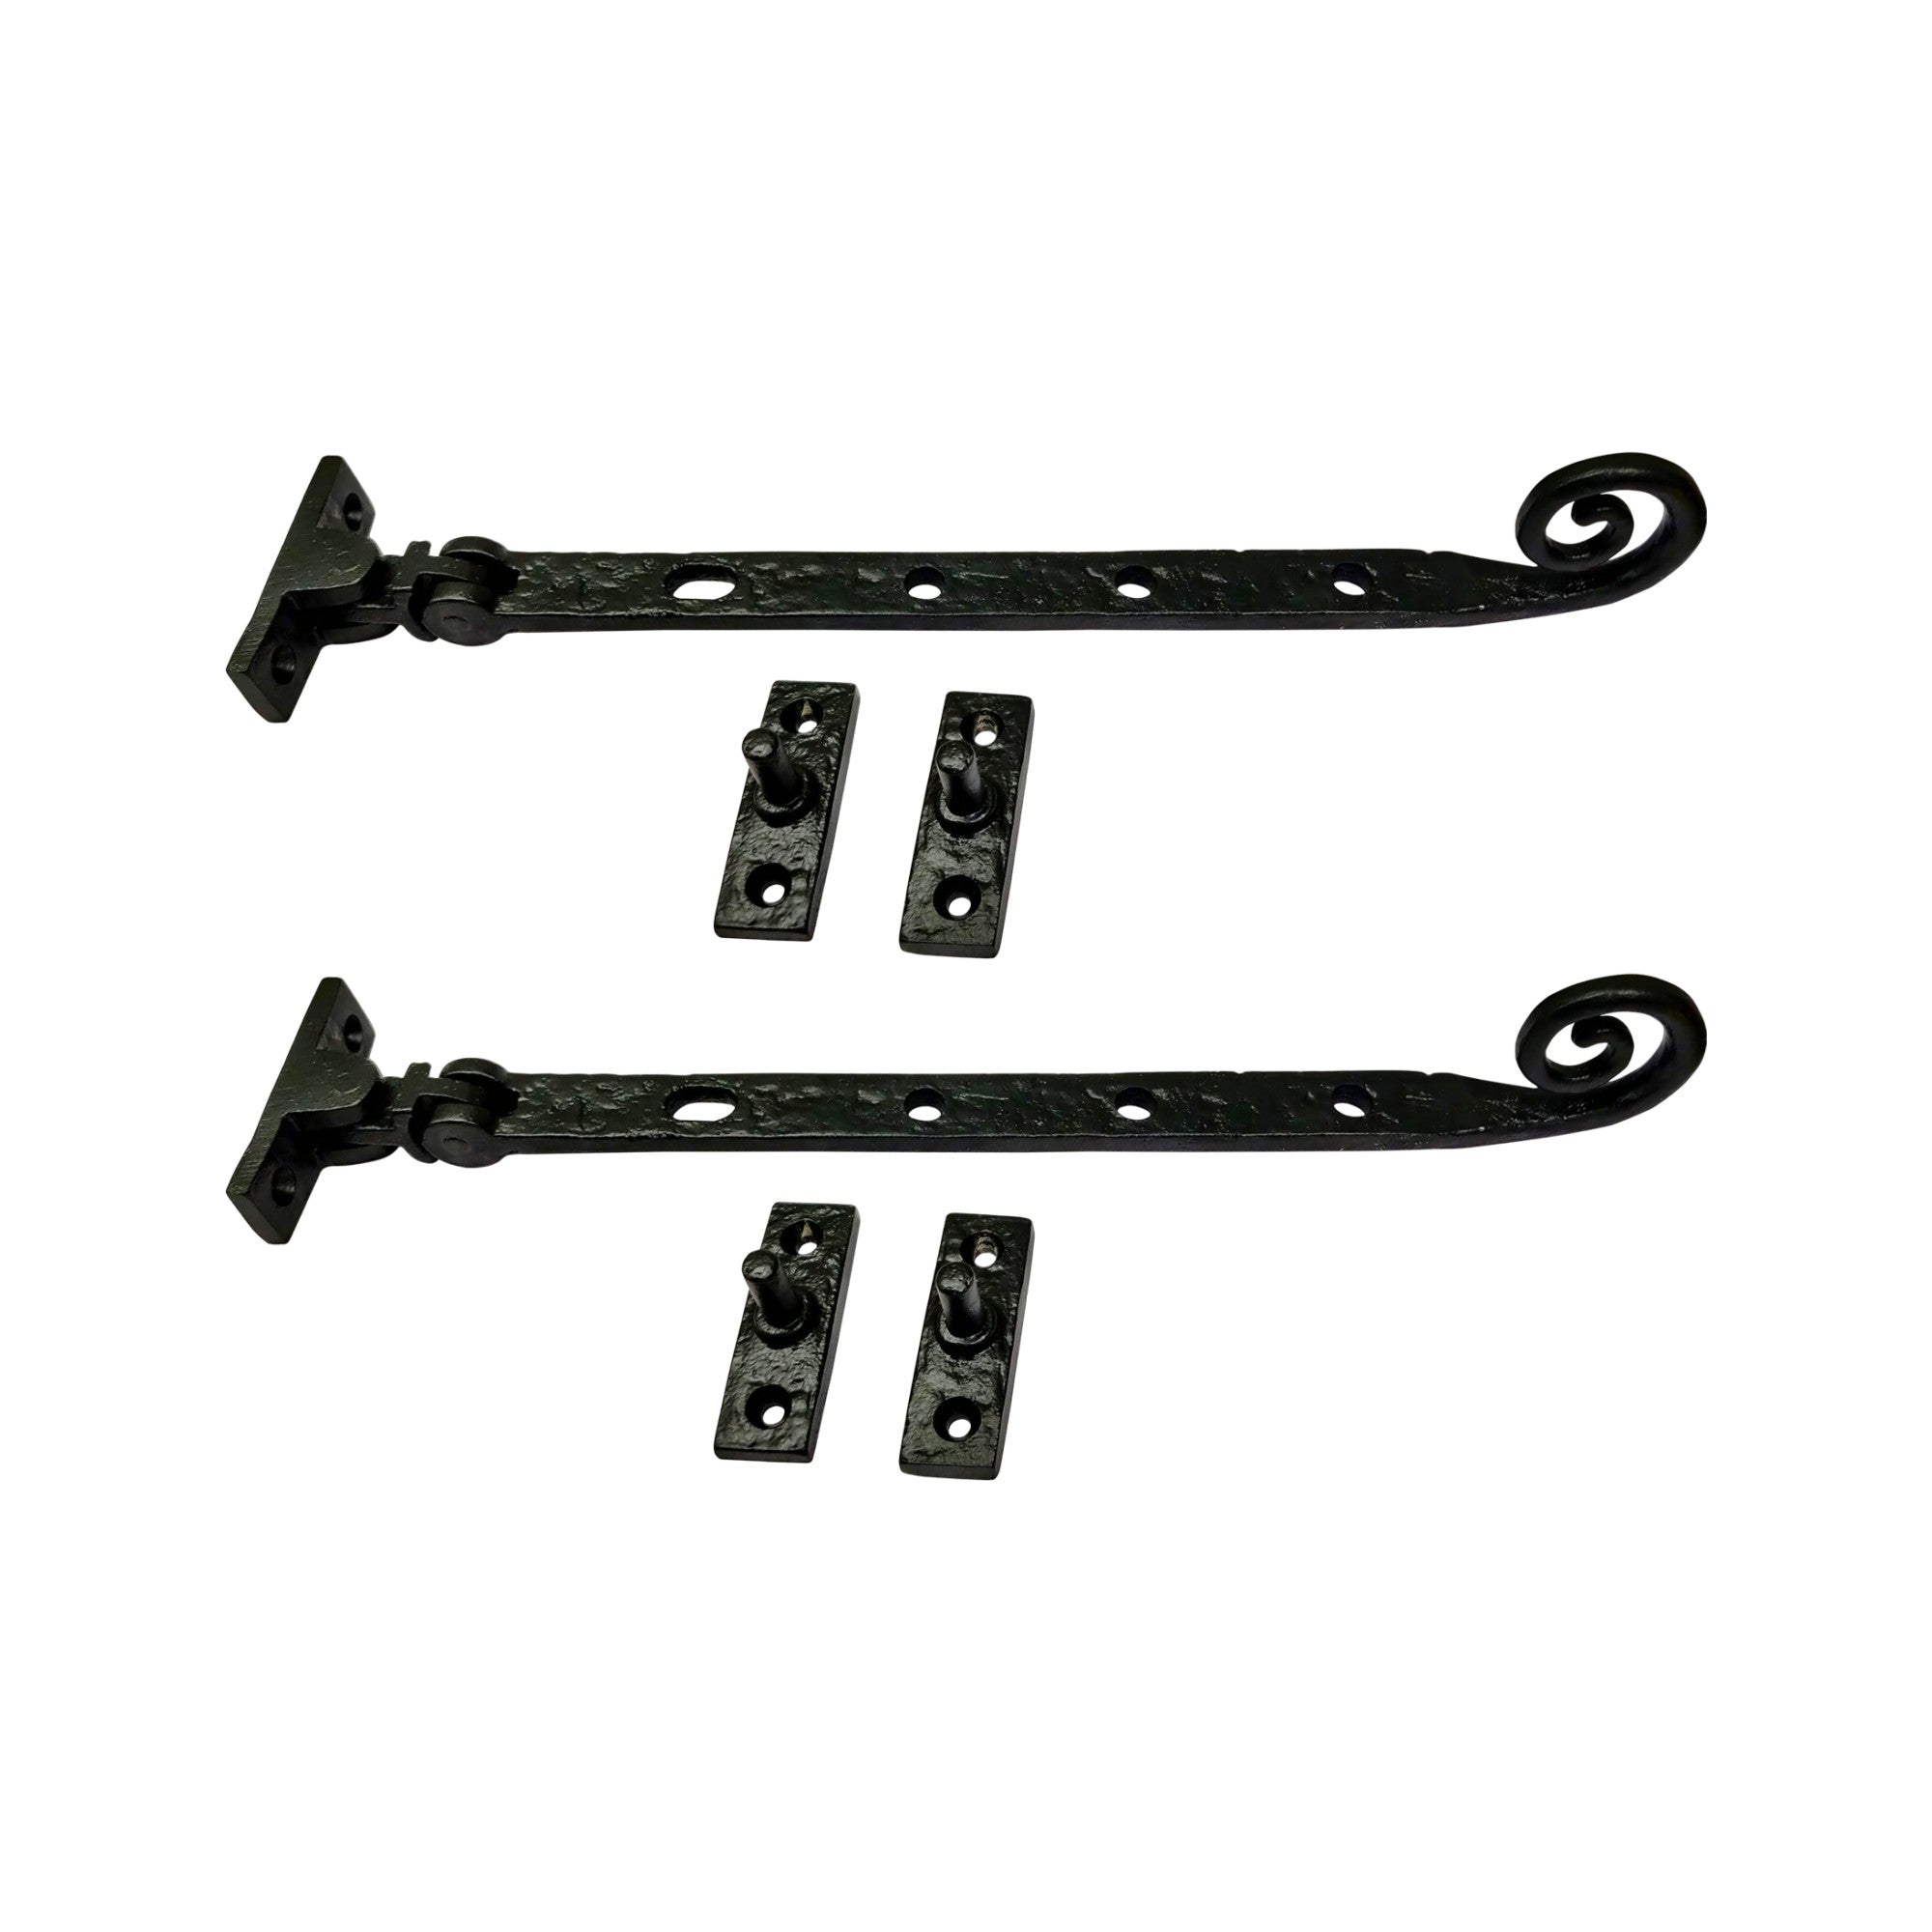 "Songhua" Premium Iron Casement Stay Pack of 2 Piece - Black Powder Coated